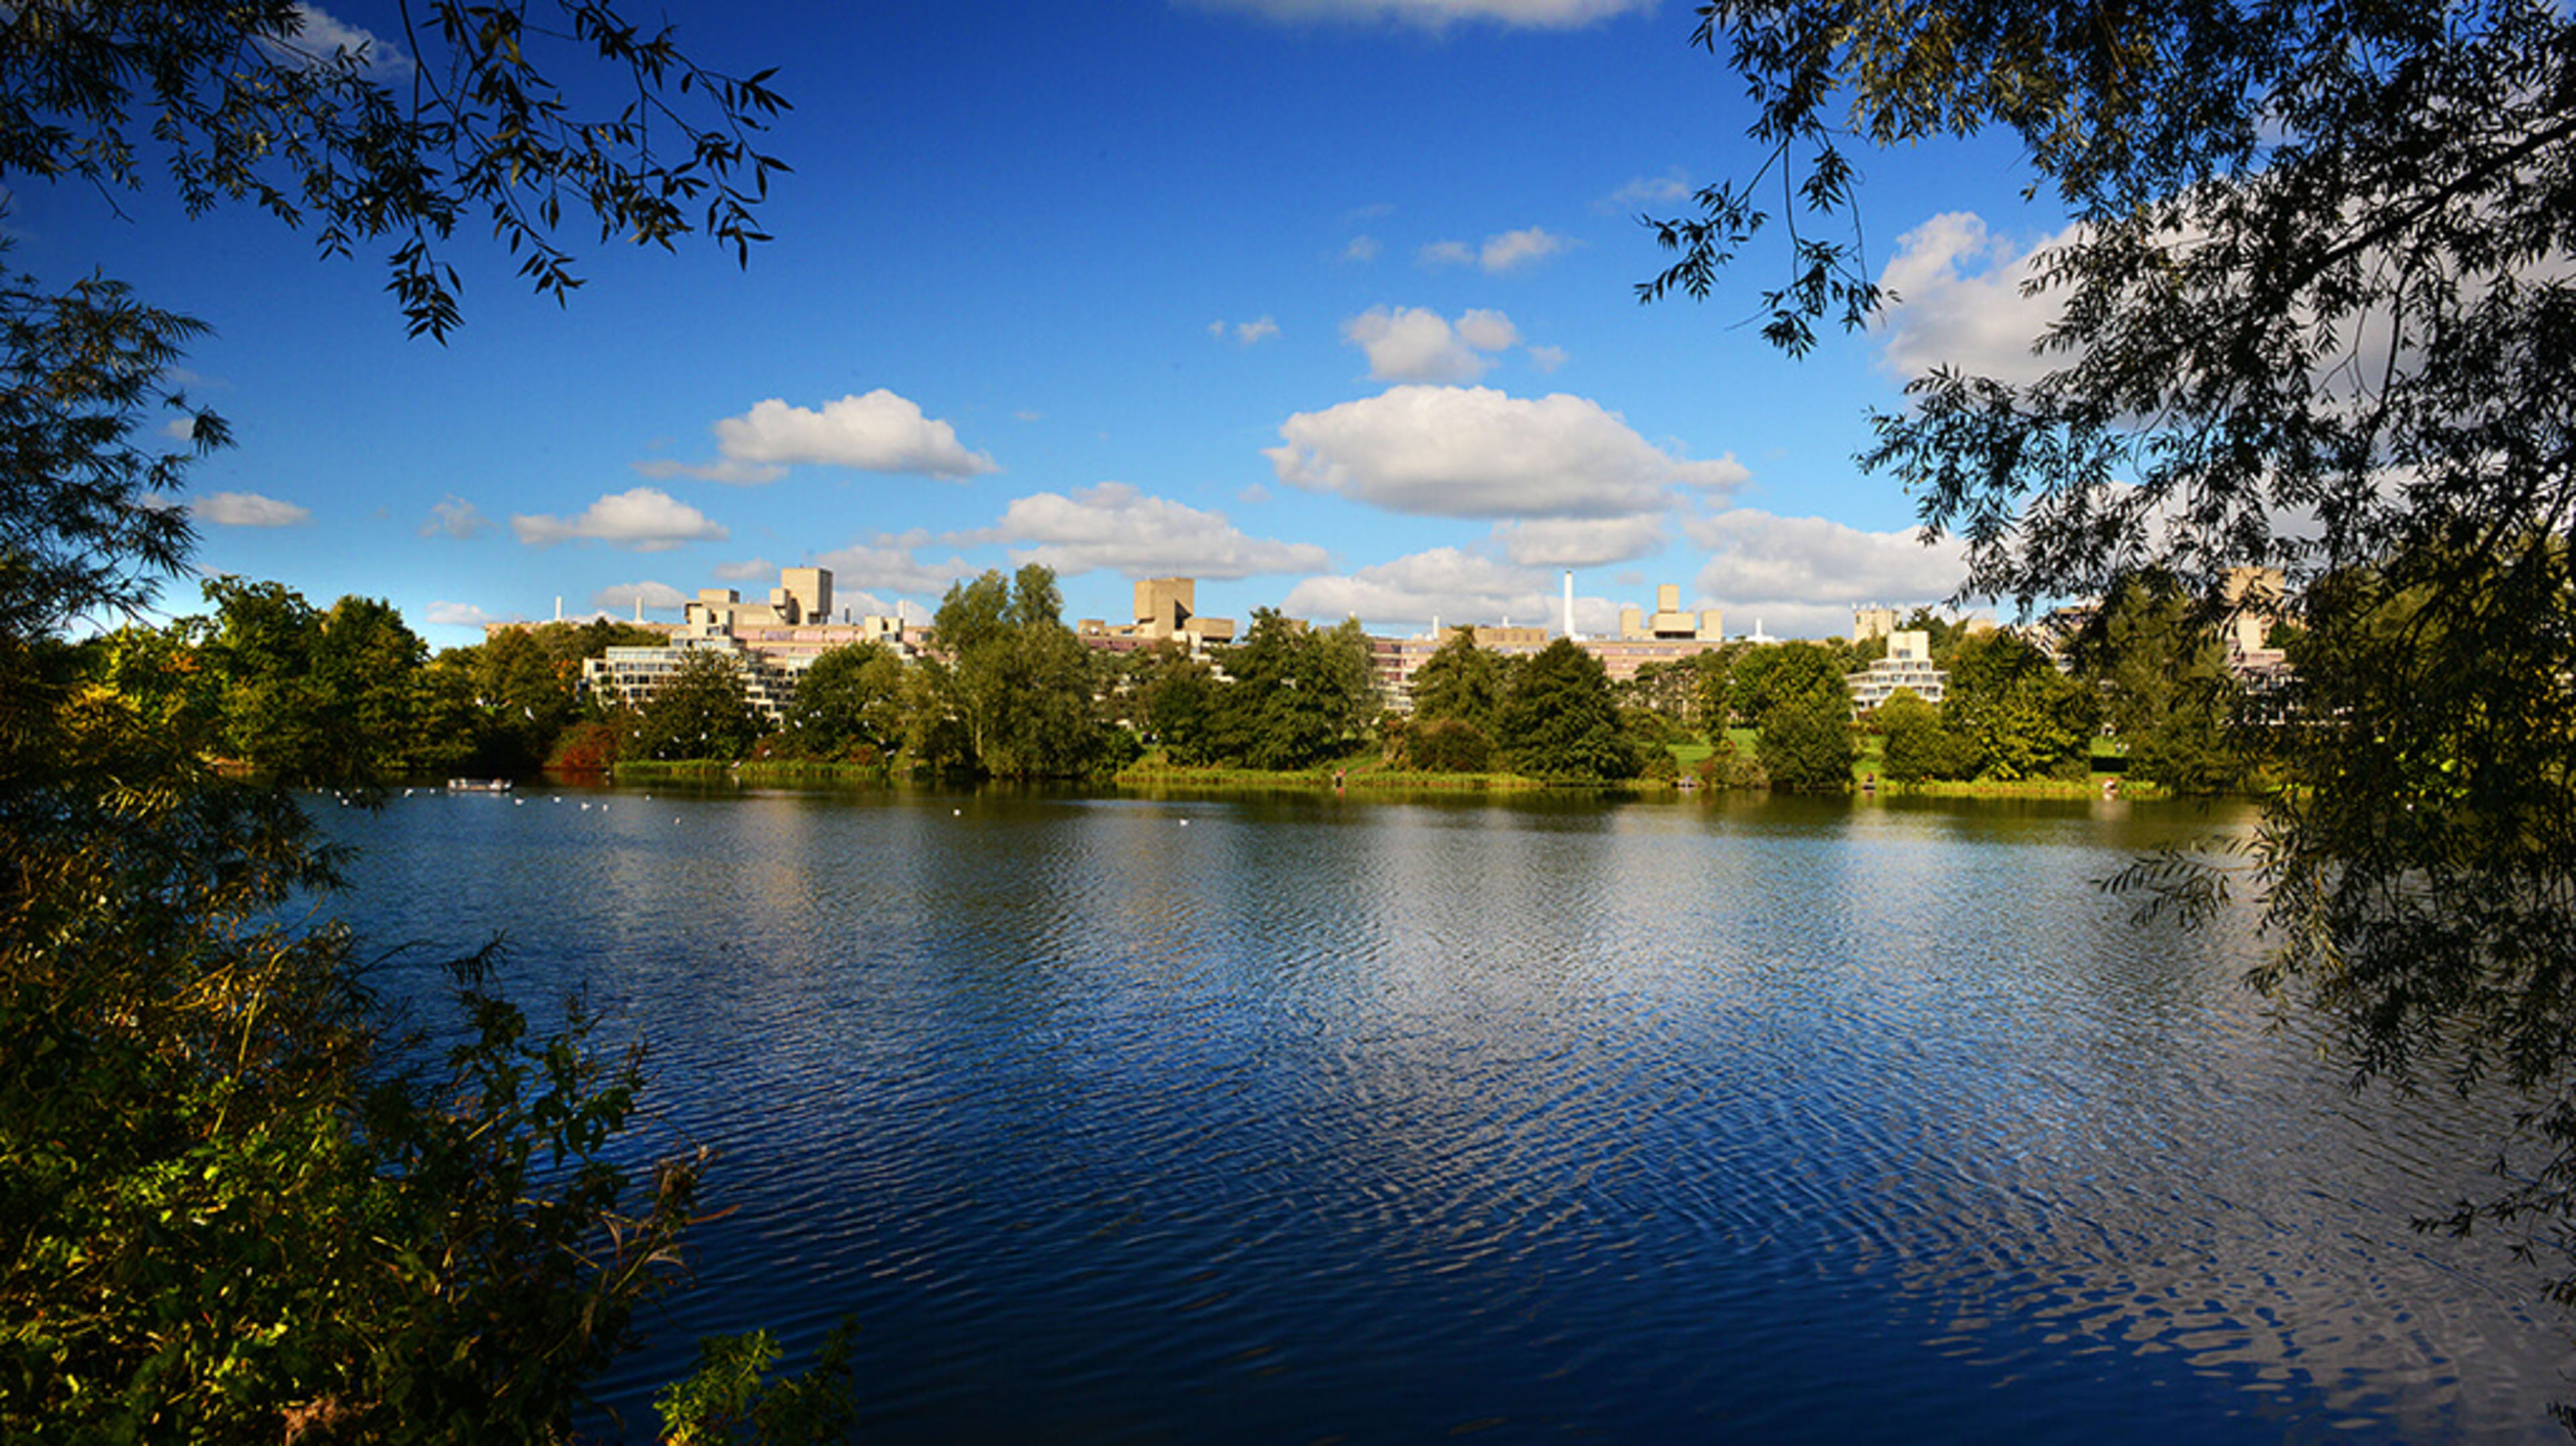 View of the Broad at the University of East Anglia